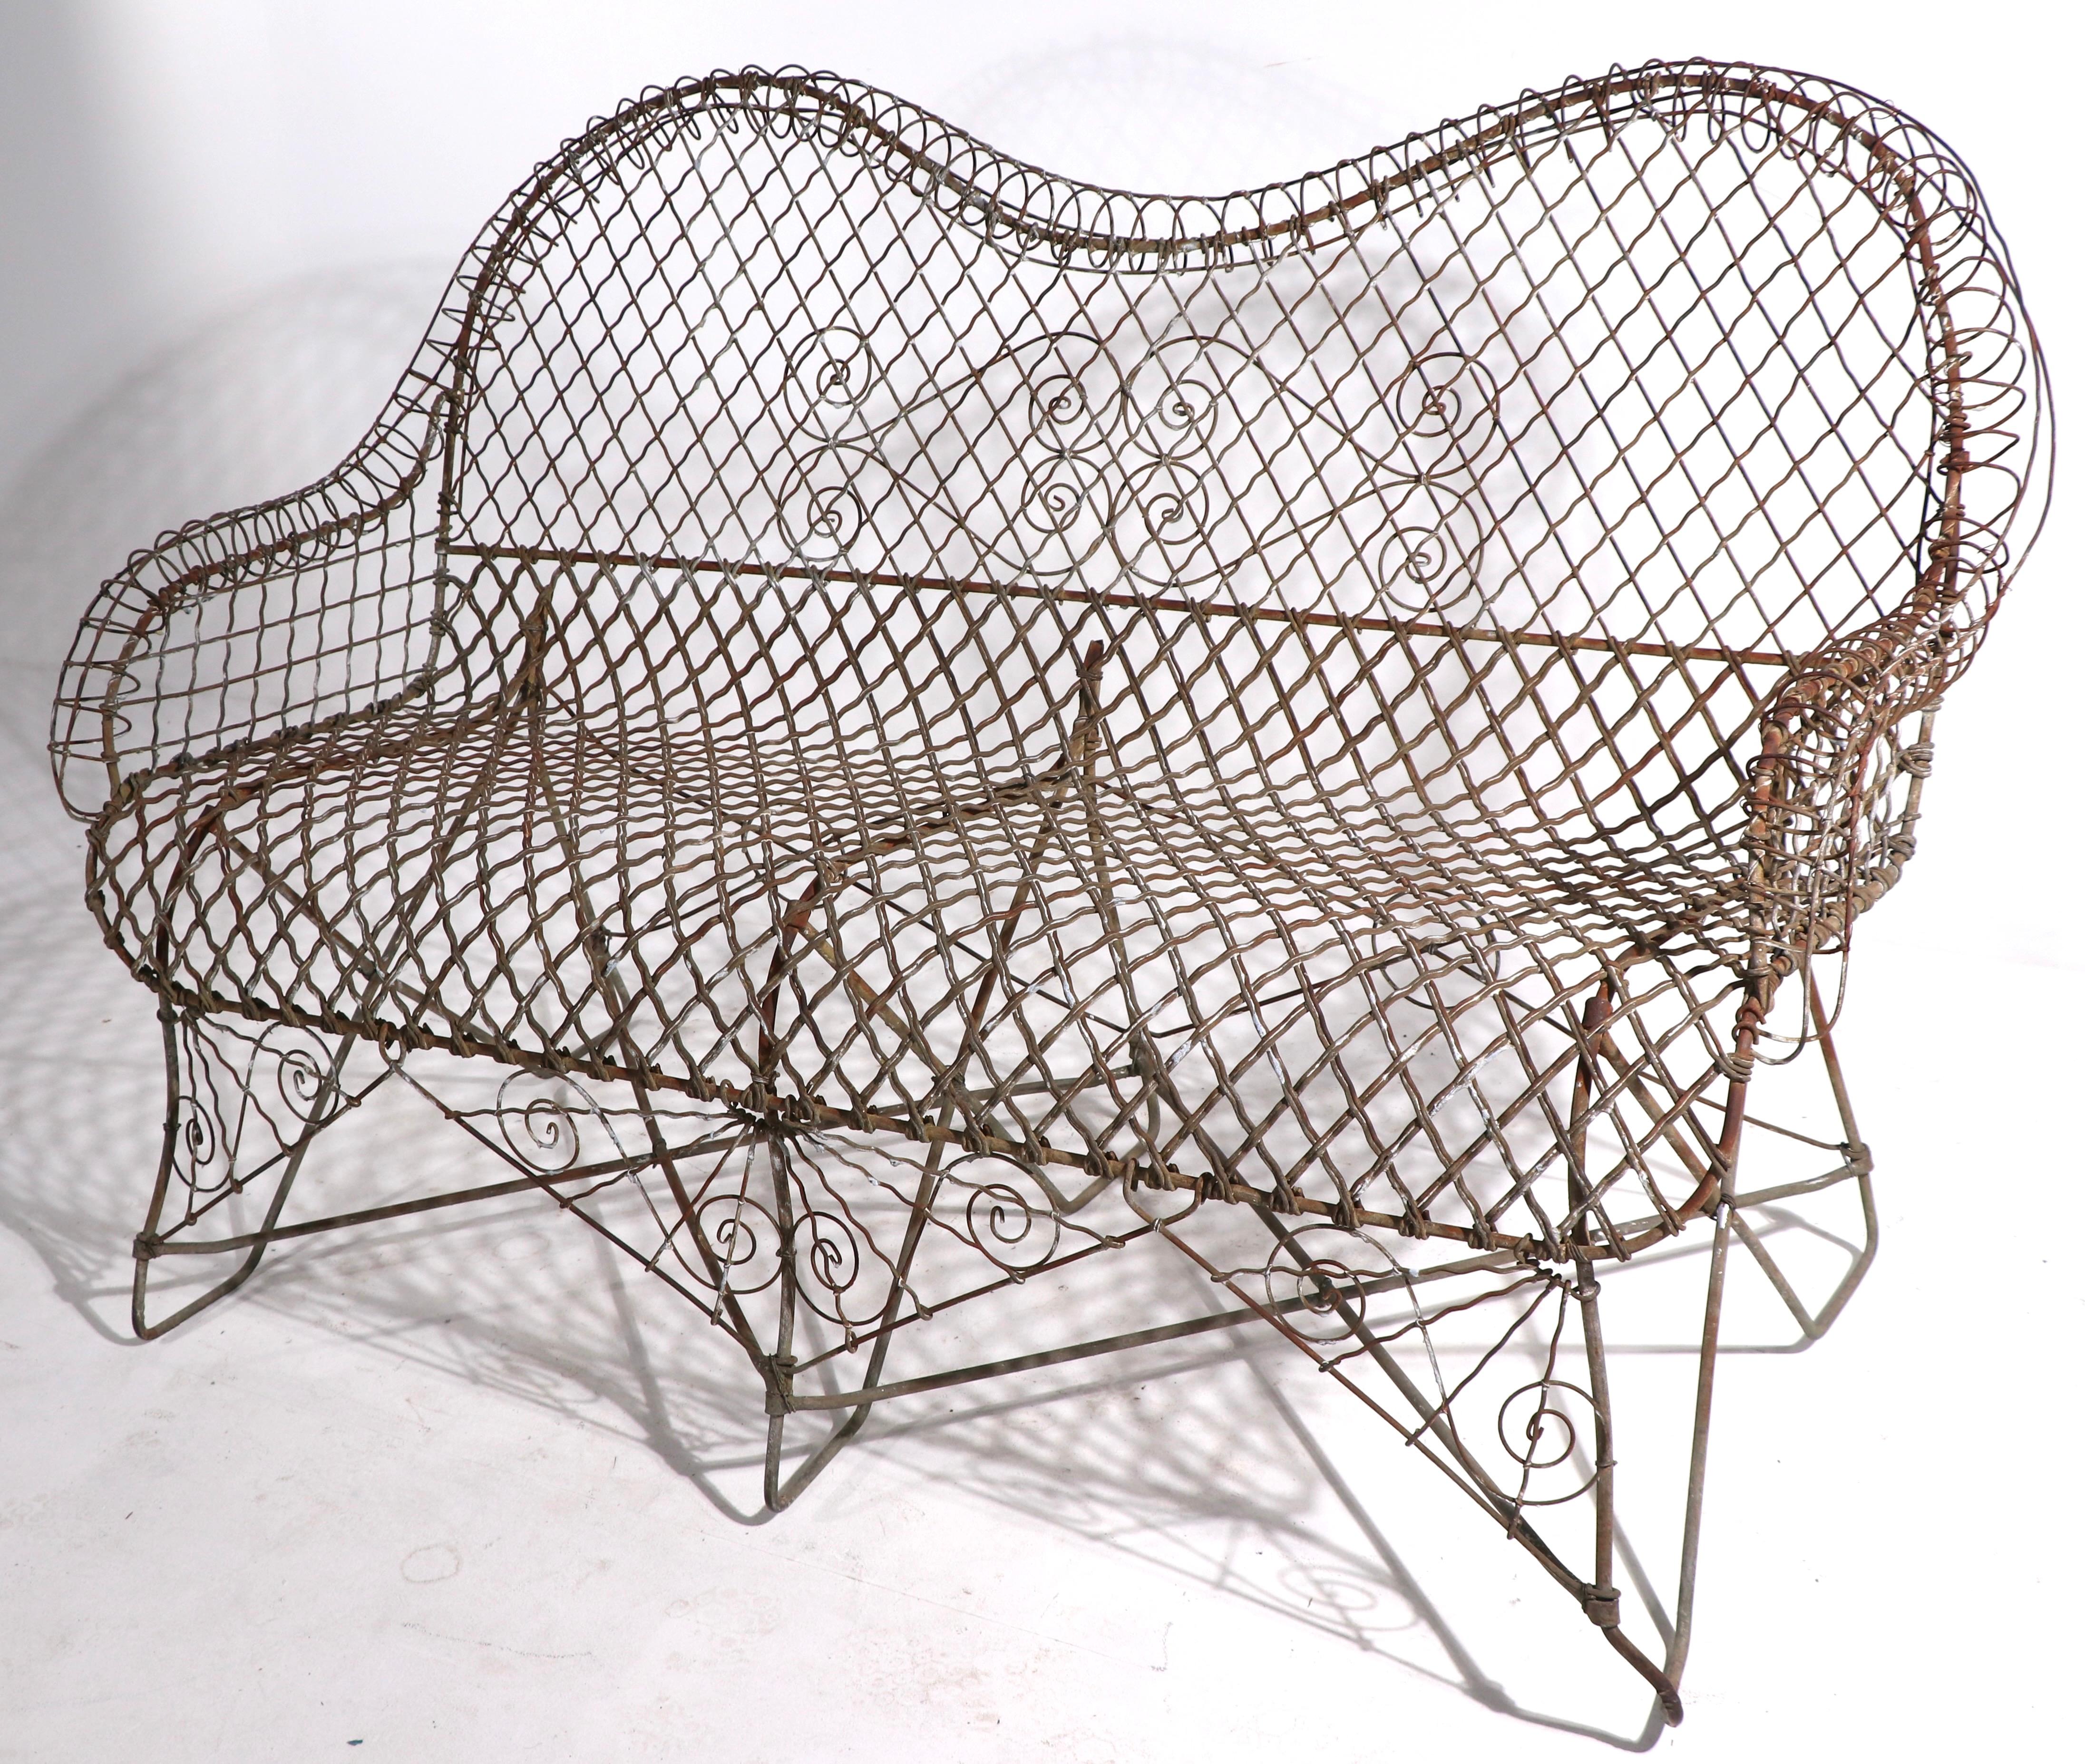 Charming Victorian style garden settee having a wire and woven metal seat and back, with wrought iron legs . This example is early 20th C vintage, it is in very good, original condition, showing expected cosmetic wear to finish, normal and